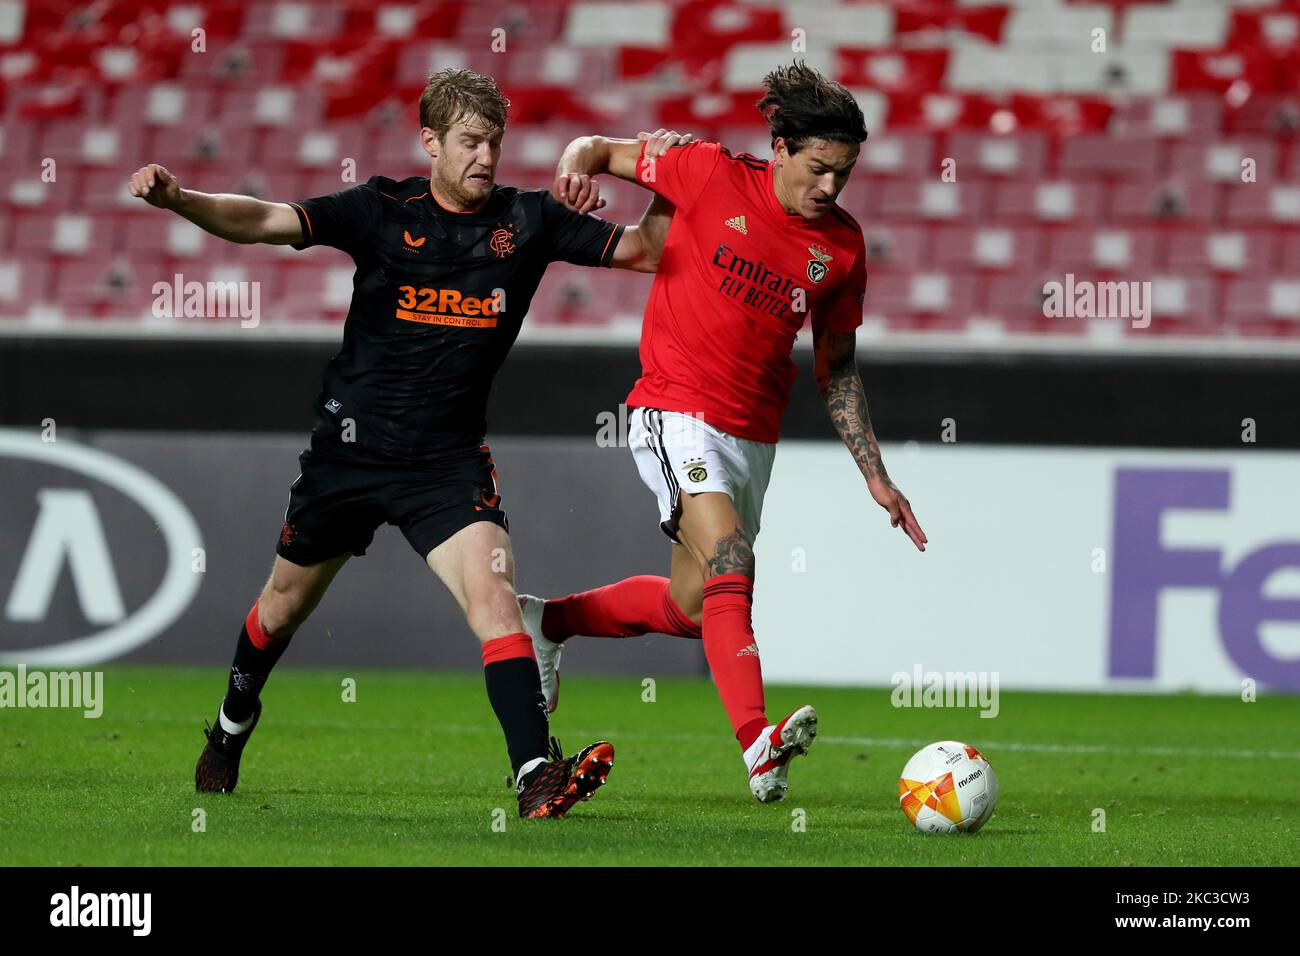 Darwin Nunez of SL Benfica (R ) vies with Filip Helander of Rangers FC during the UEFA Europa League group D football match between SL Benfica and Rangers FC at the Luz stadium in Lisbon, Portugal on November 5, 2020. (Photo by Pedro FiÃºza/NurPhoto) Stock Photo